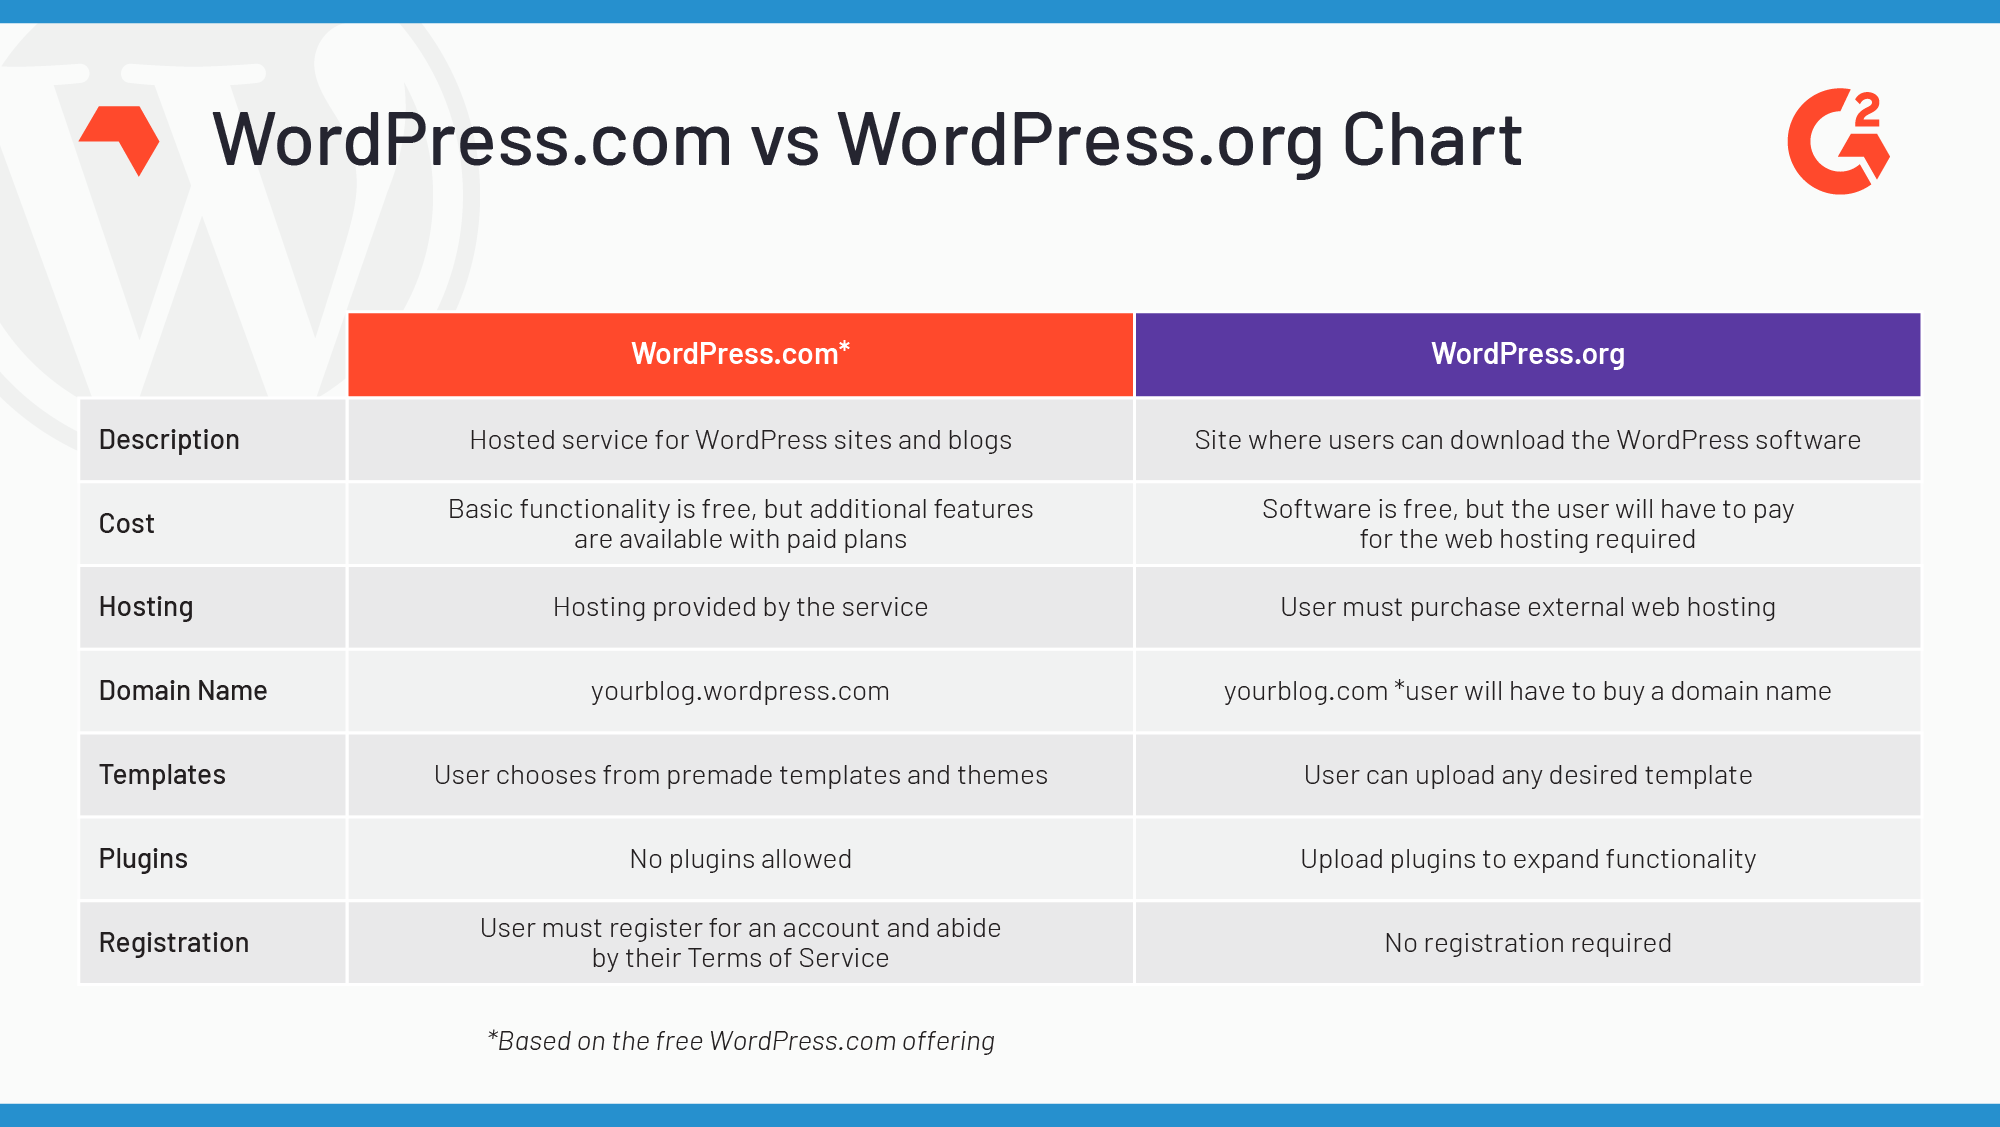 What are the differences between wordpress.org and wordpress.com?